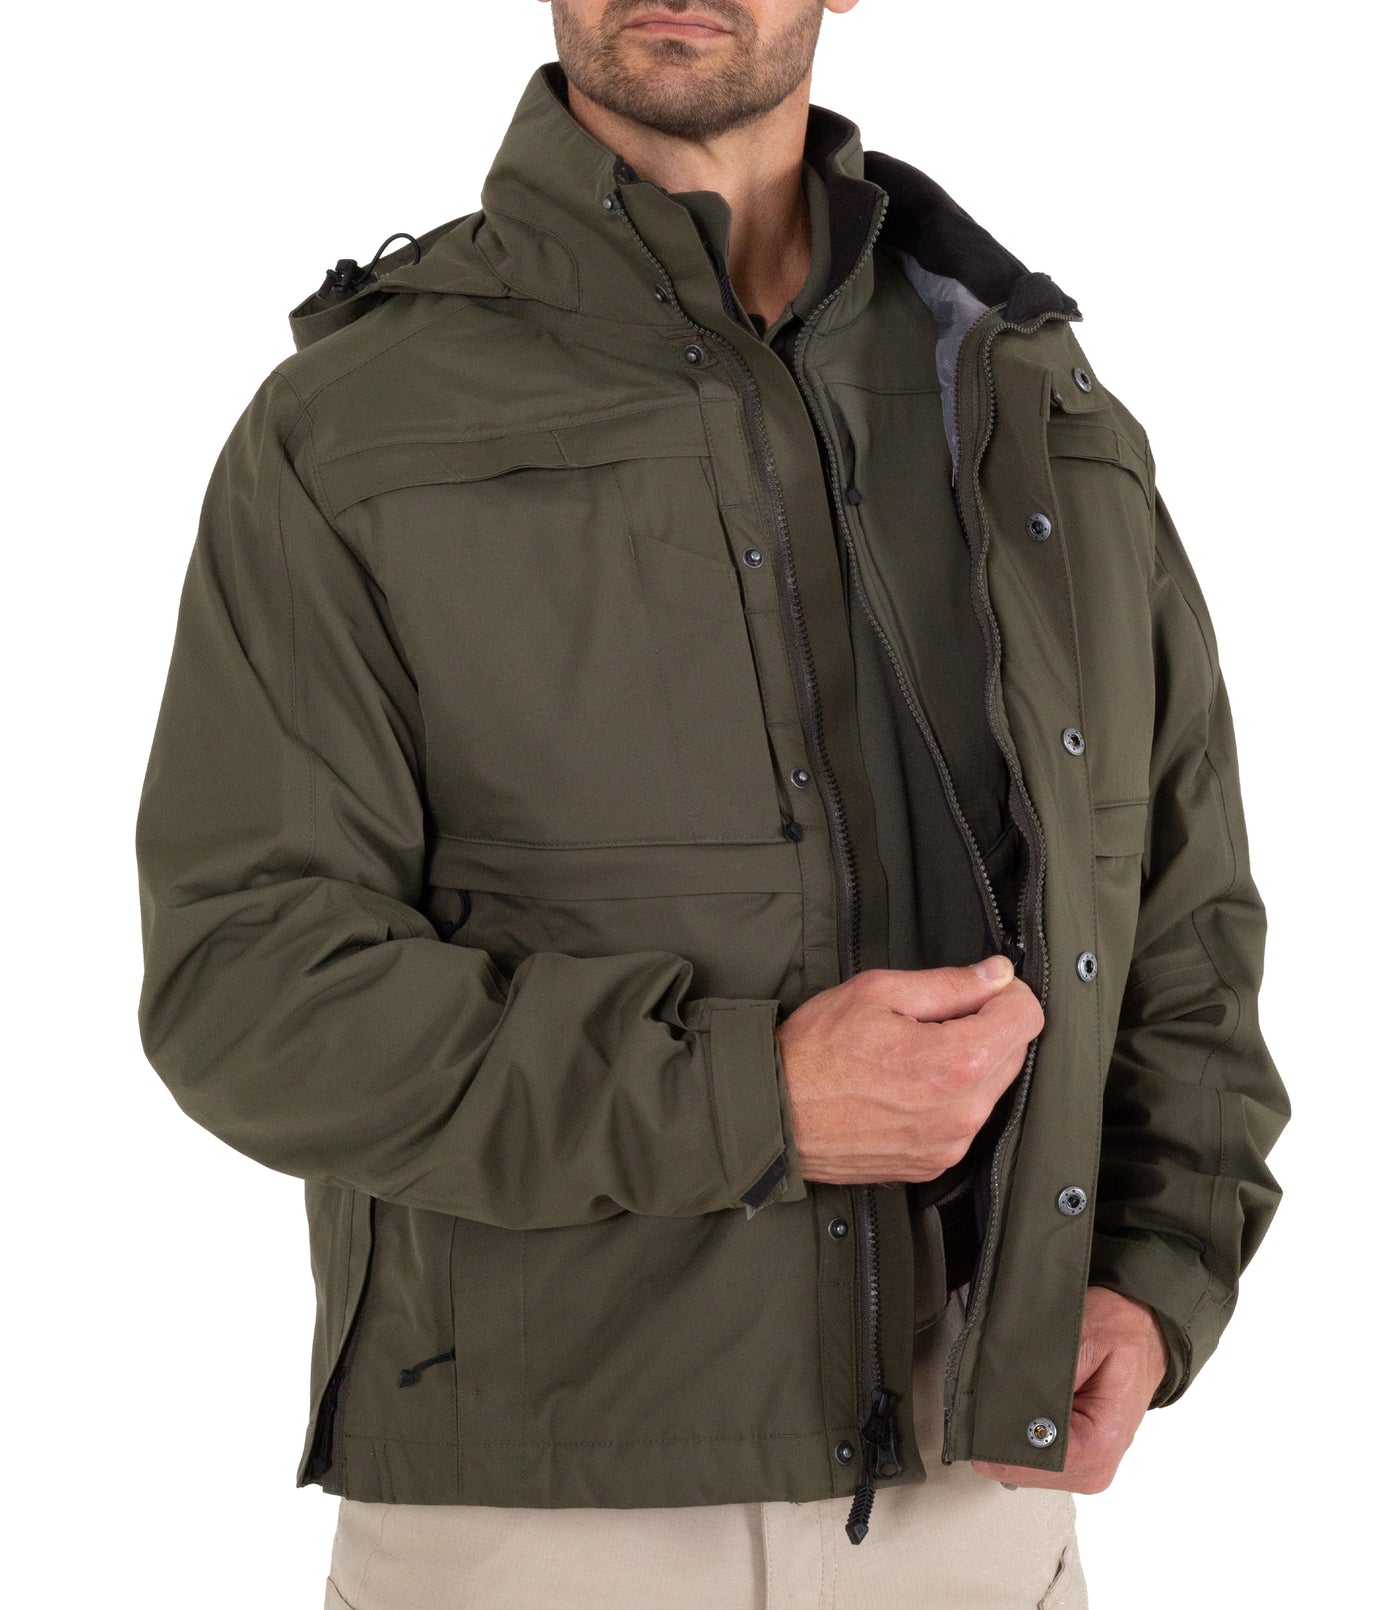 Softshell Jacket Unzipped for Men’s Tactix System Jacket in OD Green